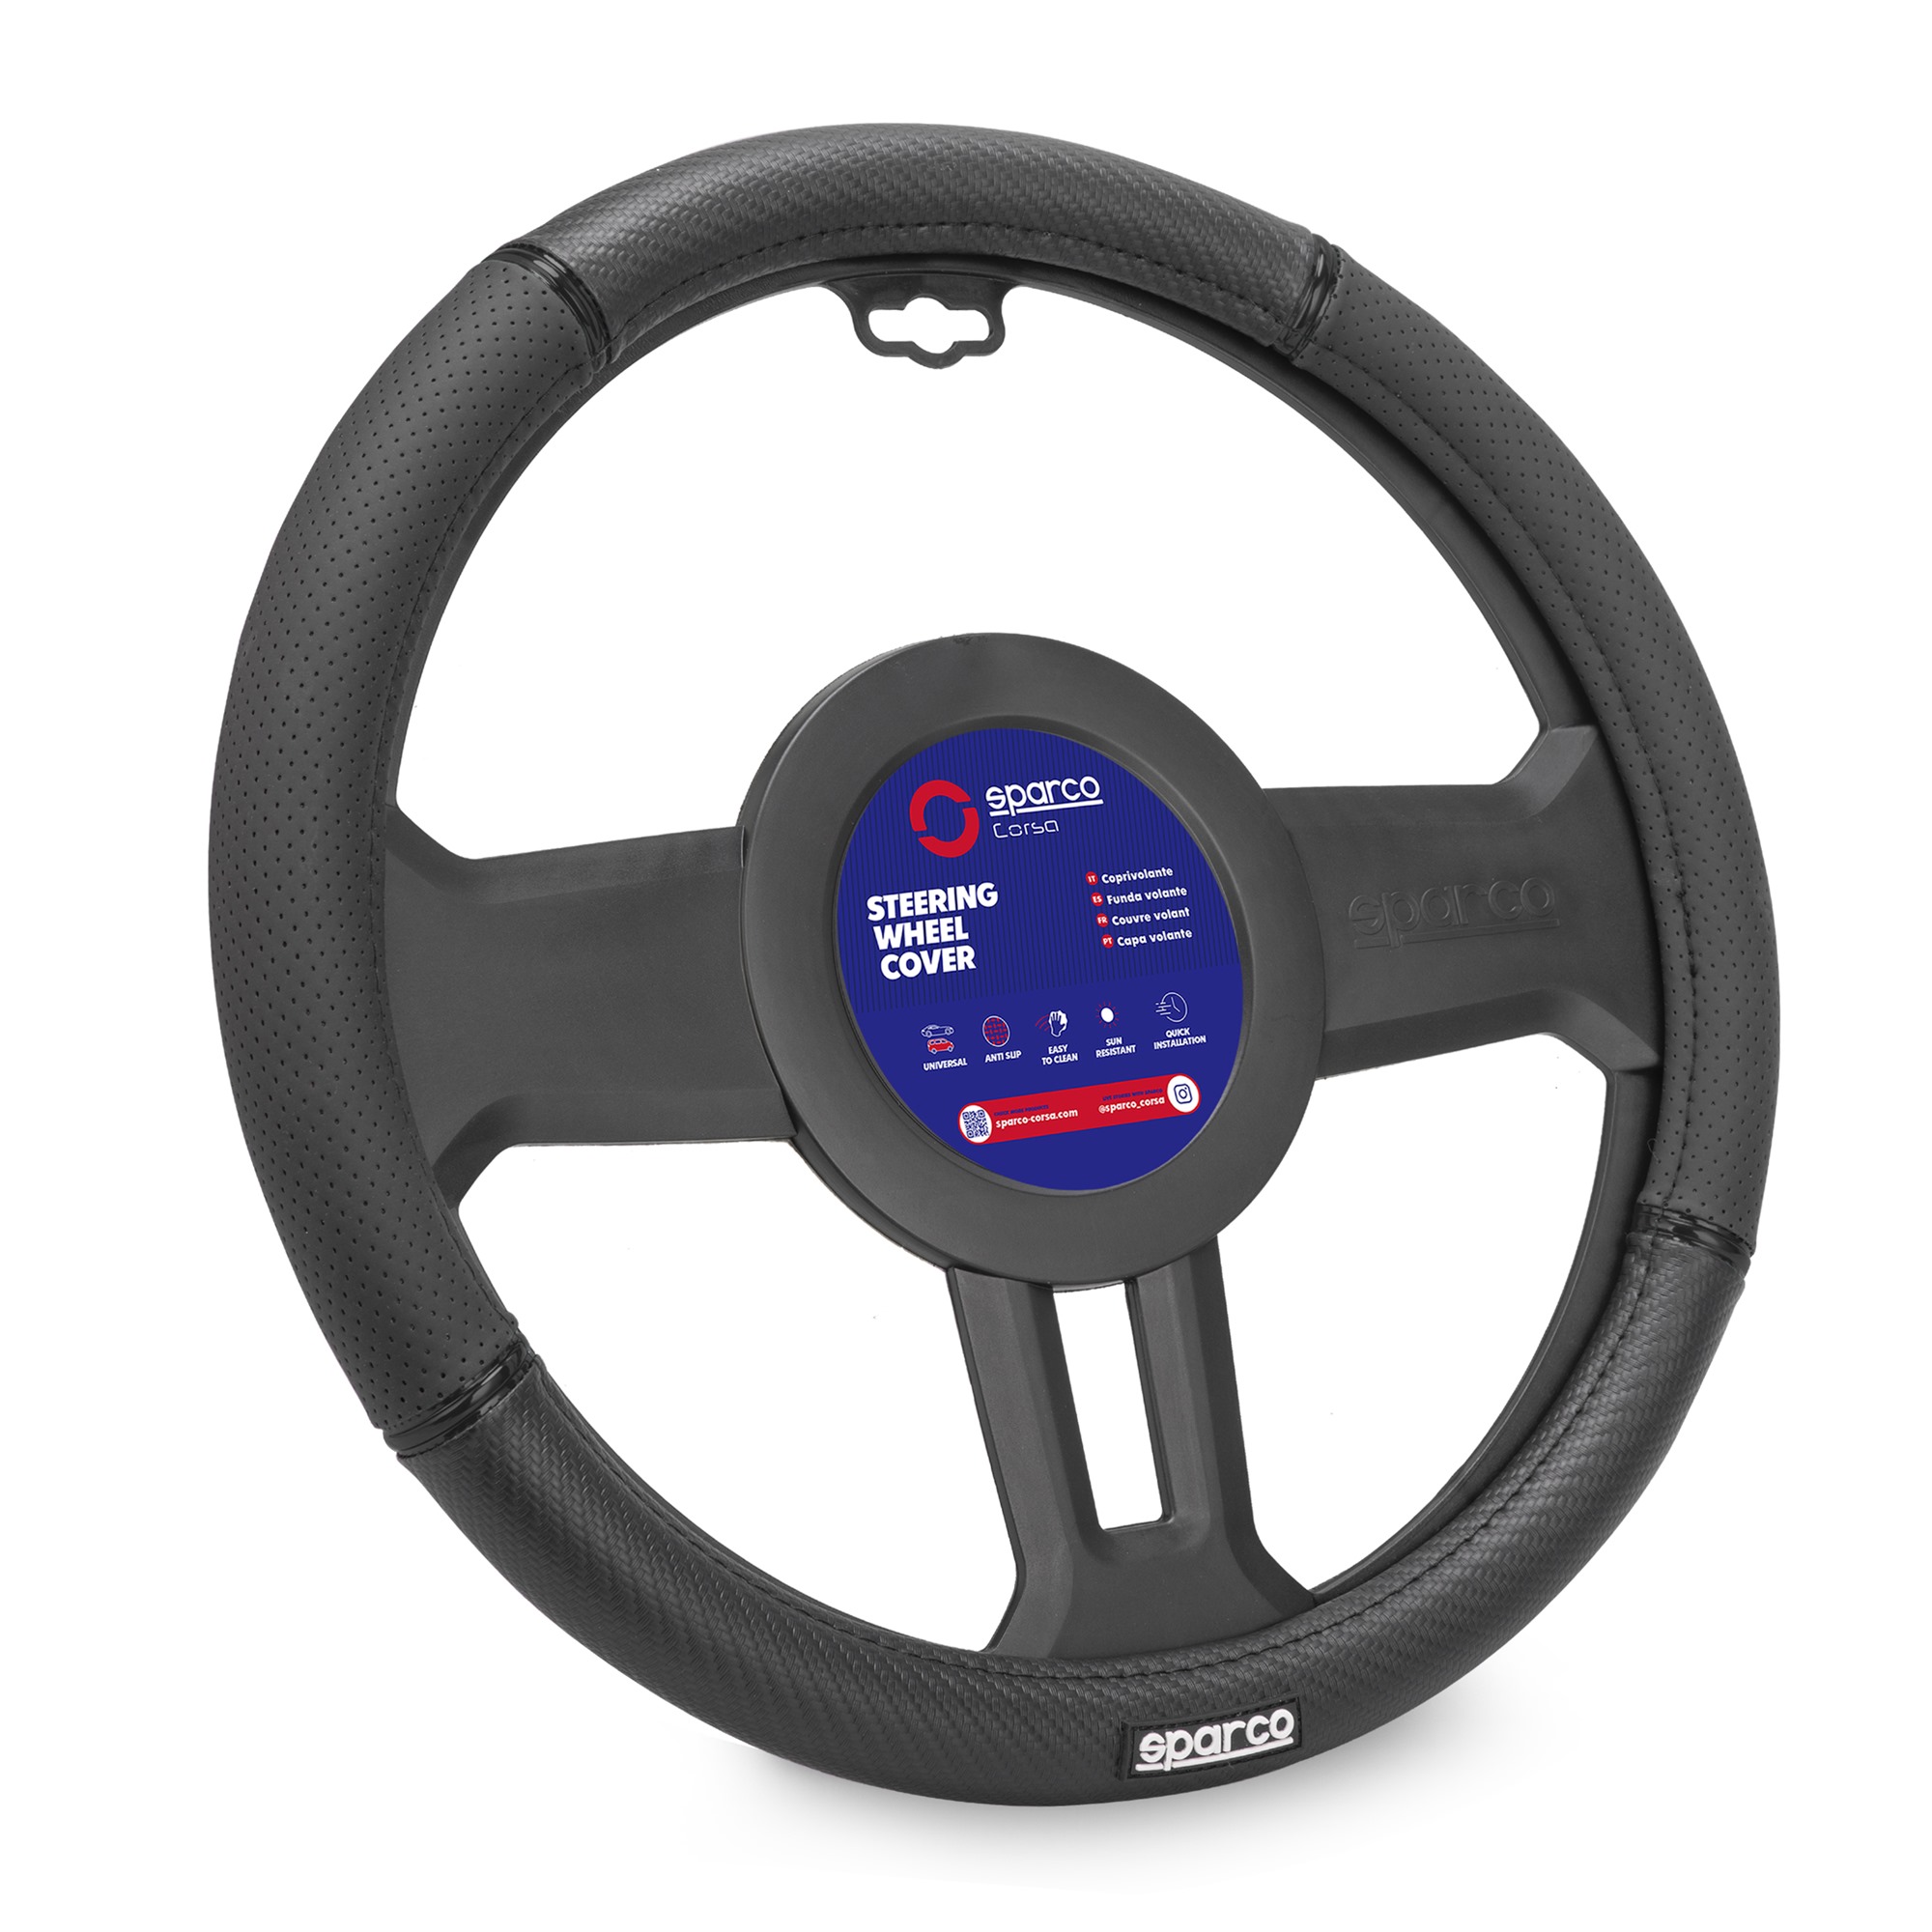 Synthetic Steering Wheel Cover black 1pc Sparco